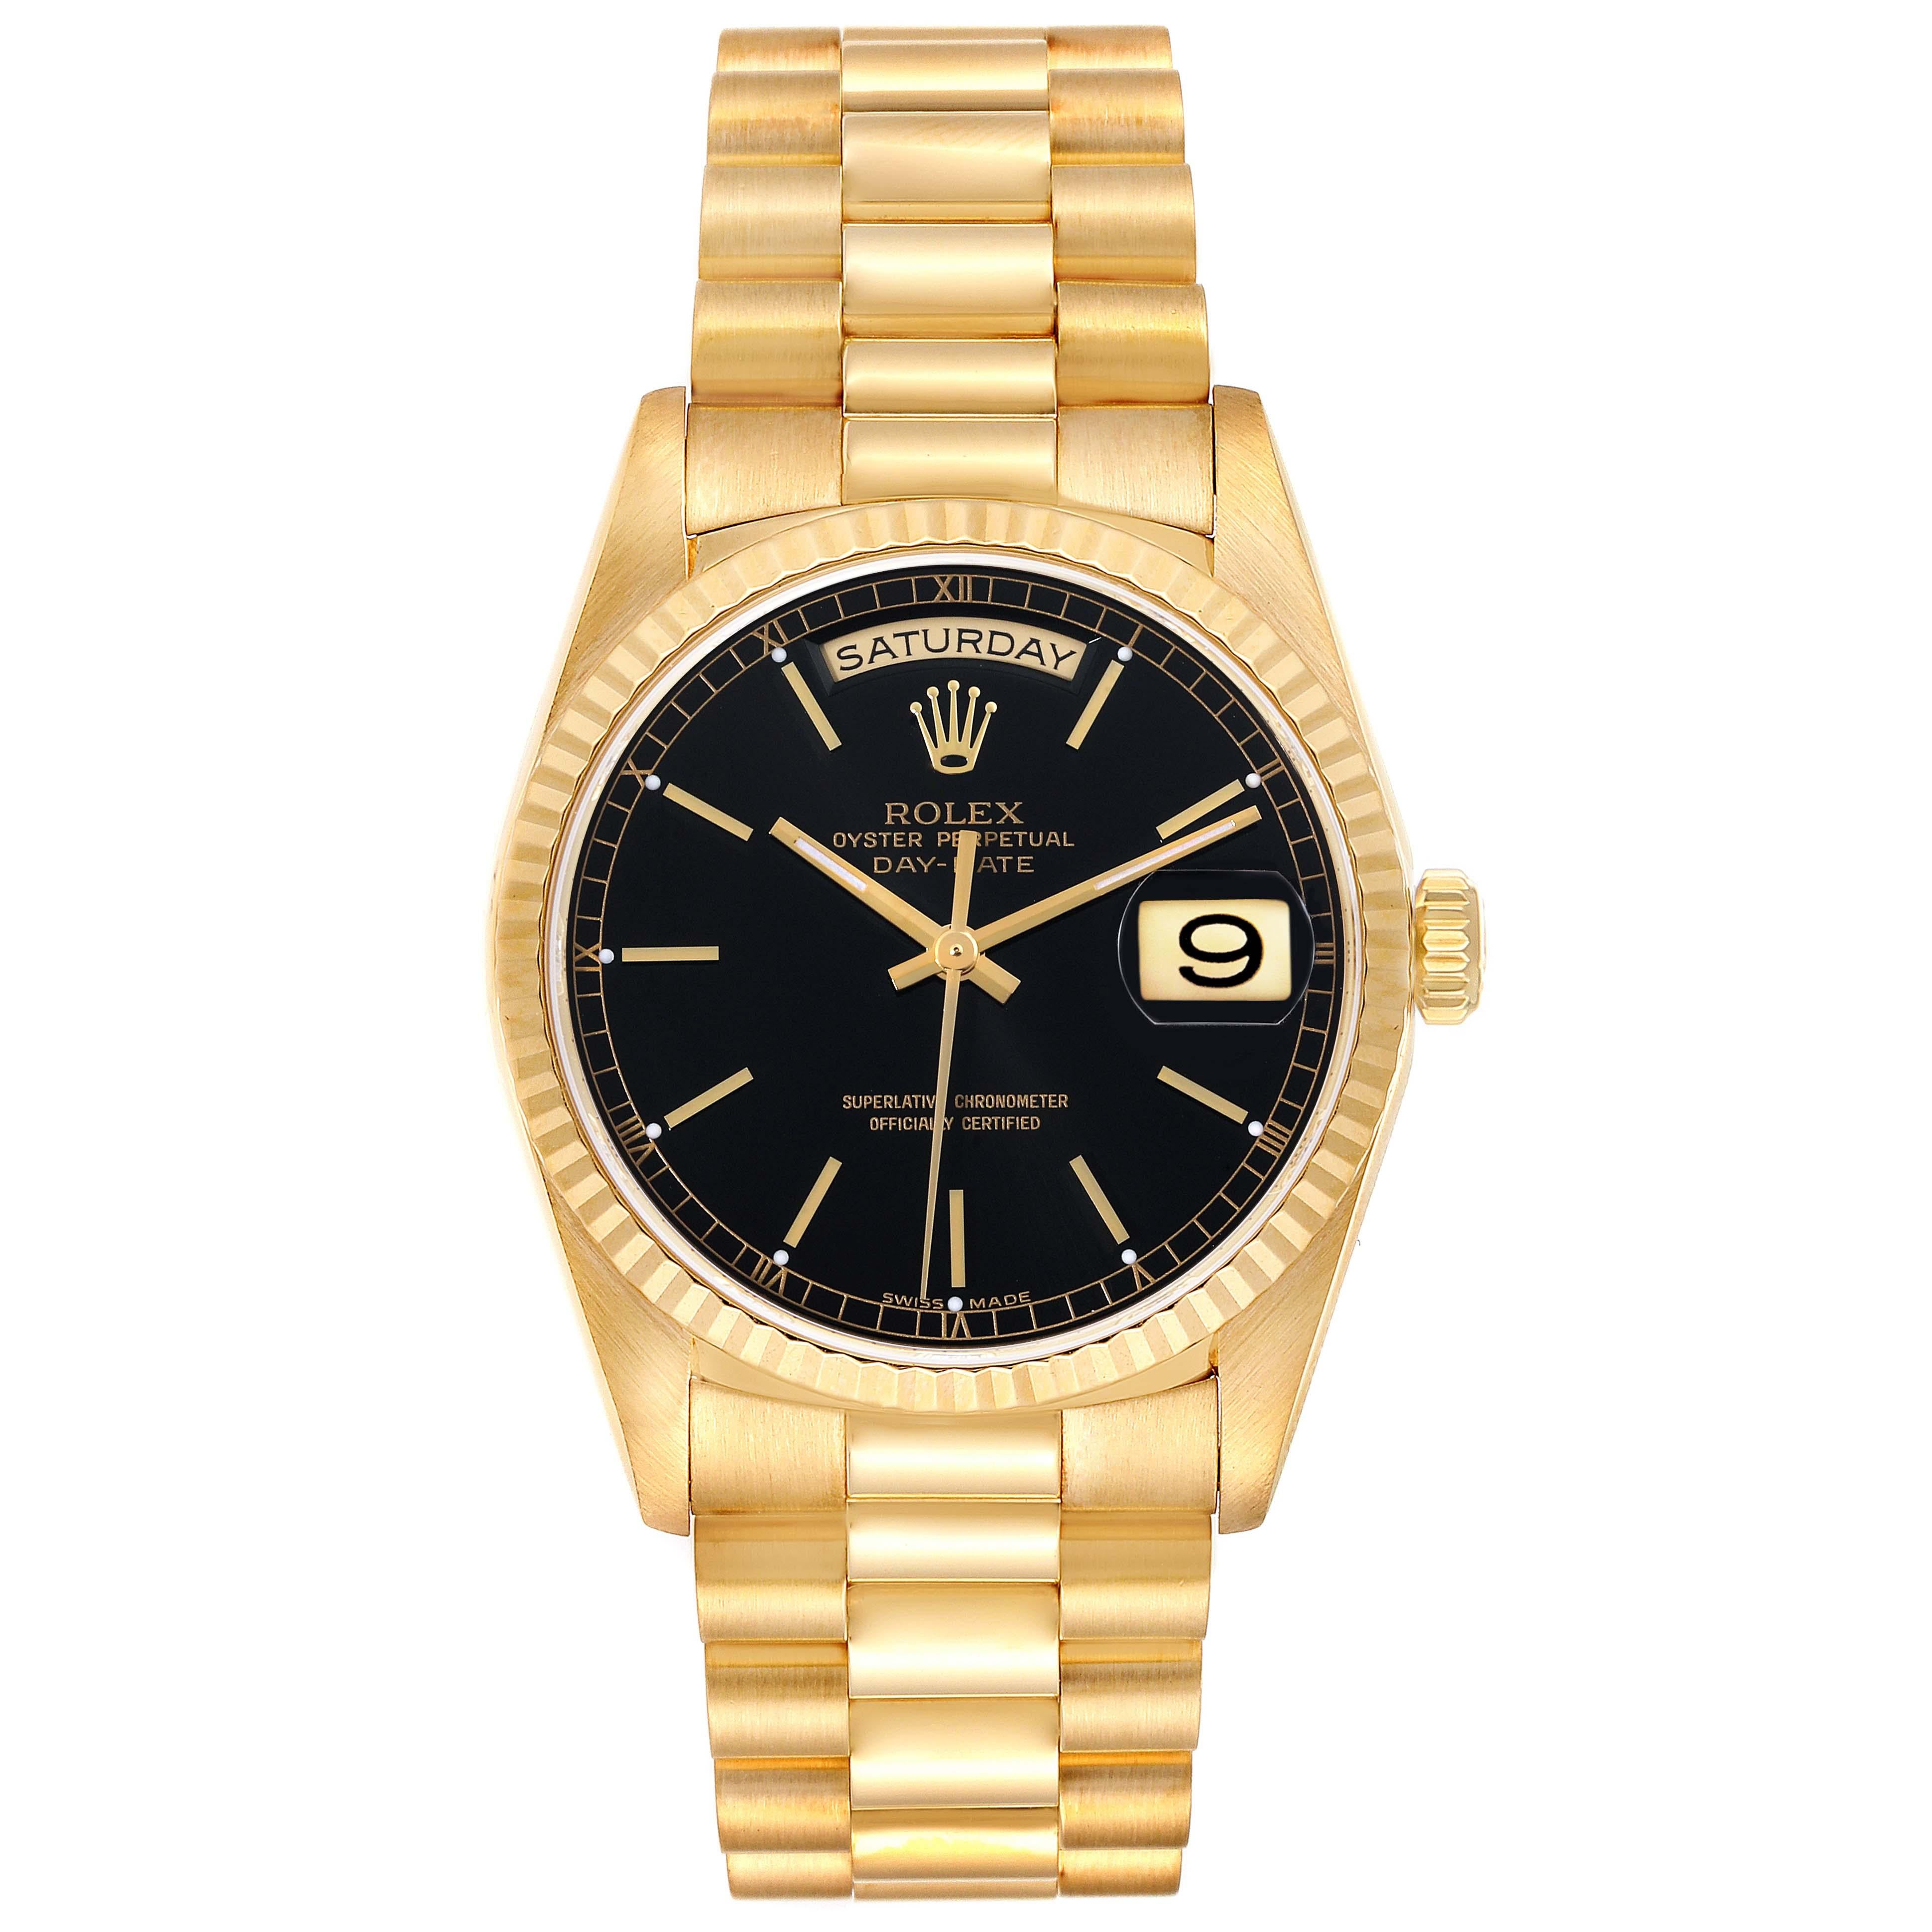 Rolex President Day-Date Yellow Gold Black Dial Mens Watch 18238. Officially certified chronometer automatic self-winding movement. 18k yellow gold oyster case 36.0 mm in diameter. Rolex logo on the crown. 18K yellow gold fluted bezel. Scratch